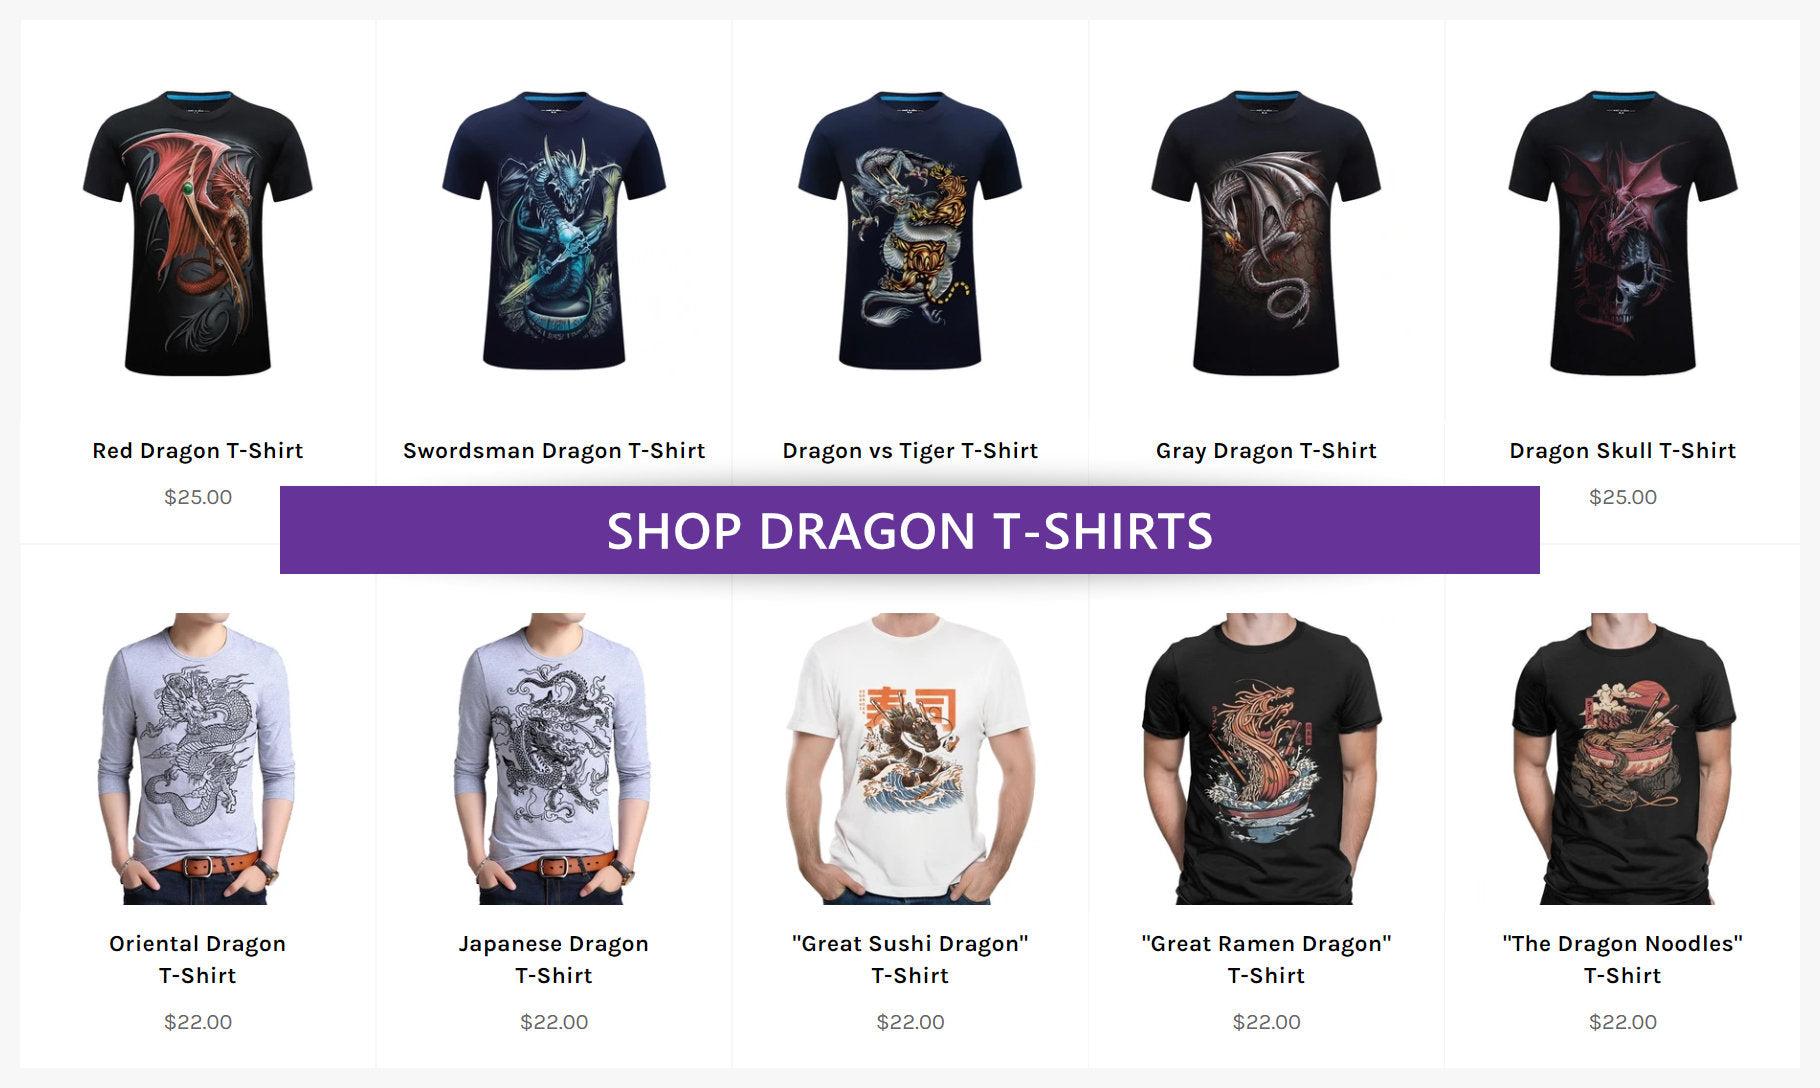 A collection of Dragon T-Shirts